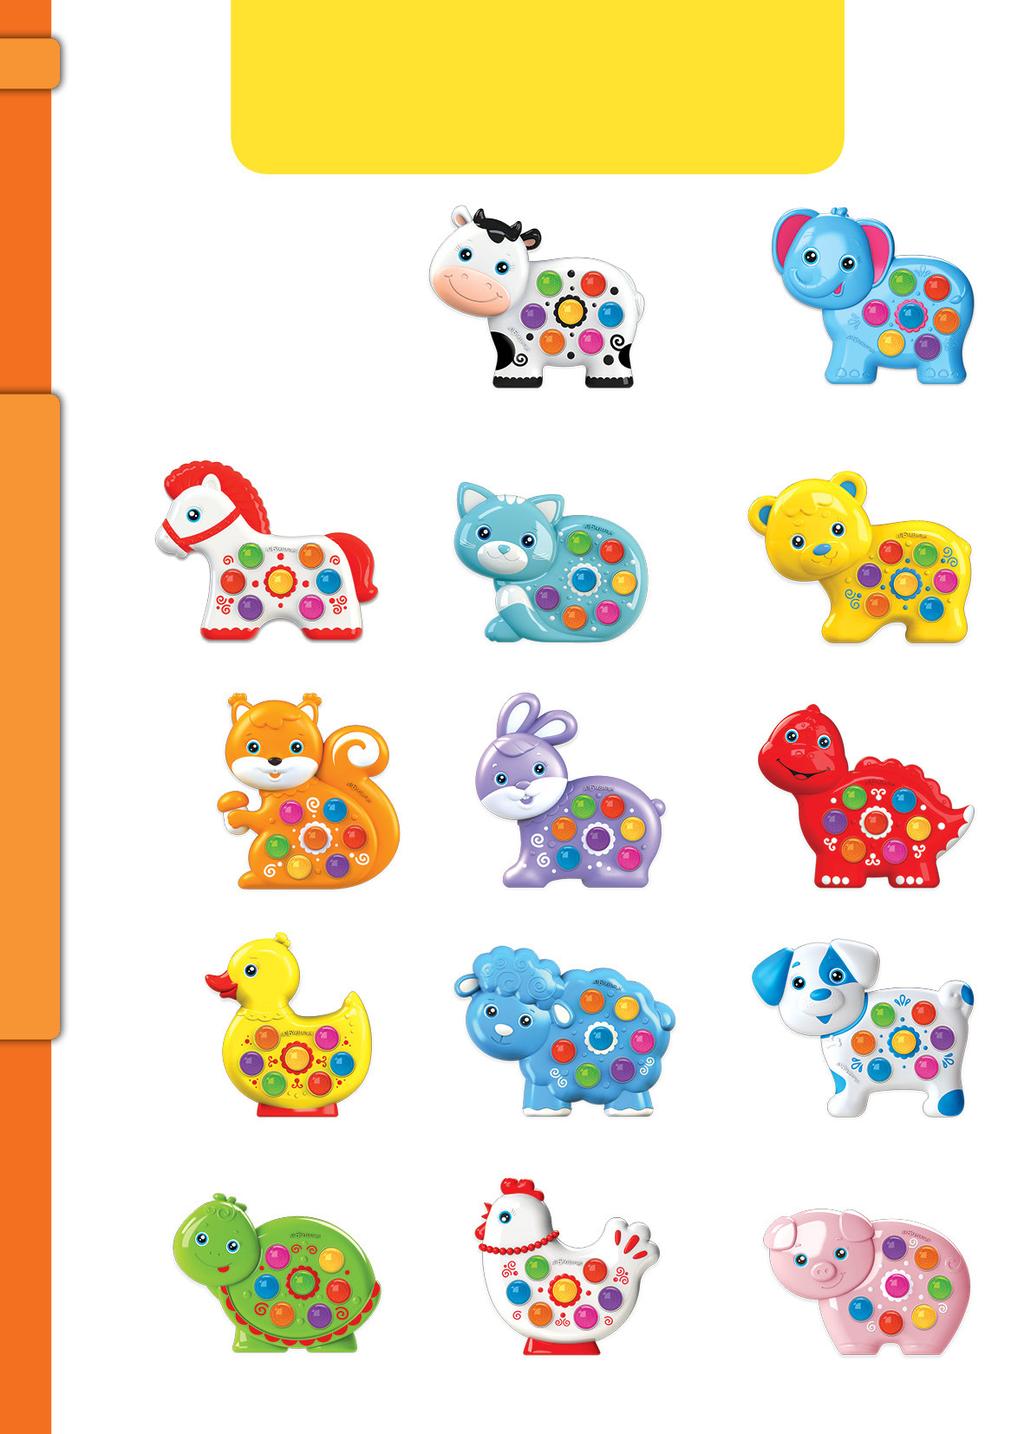 34 Animal Cuties 2+ 11 songs and tunes Flashing lights 190x210 mm 155x130 mm COW ELEPHANT MUSICAL AND ENTERTAINING TOYS HORSE REF. AZT-59-A-003 SQUIRREL REF. AZT-59-A-006 REF. AZT-59-A-001 CAT REF.